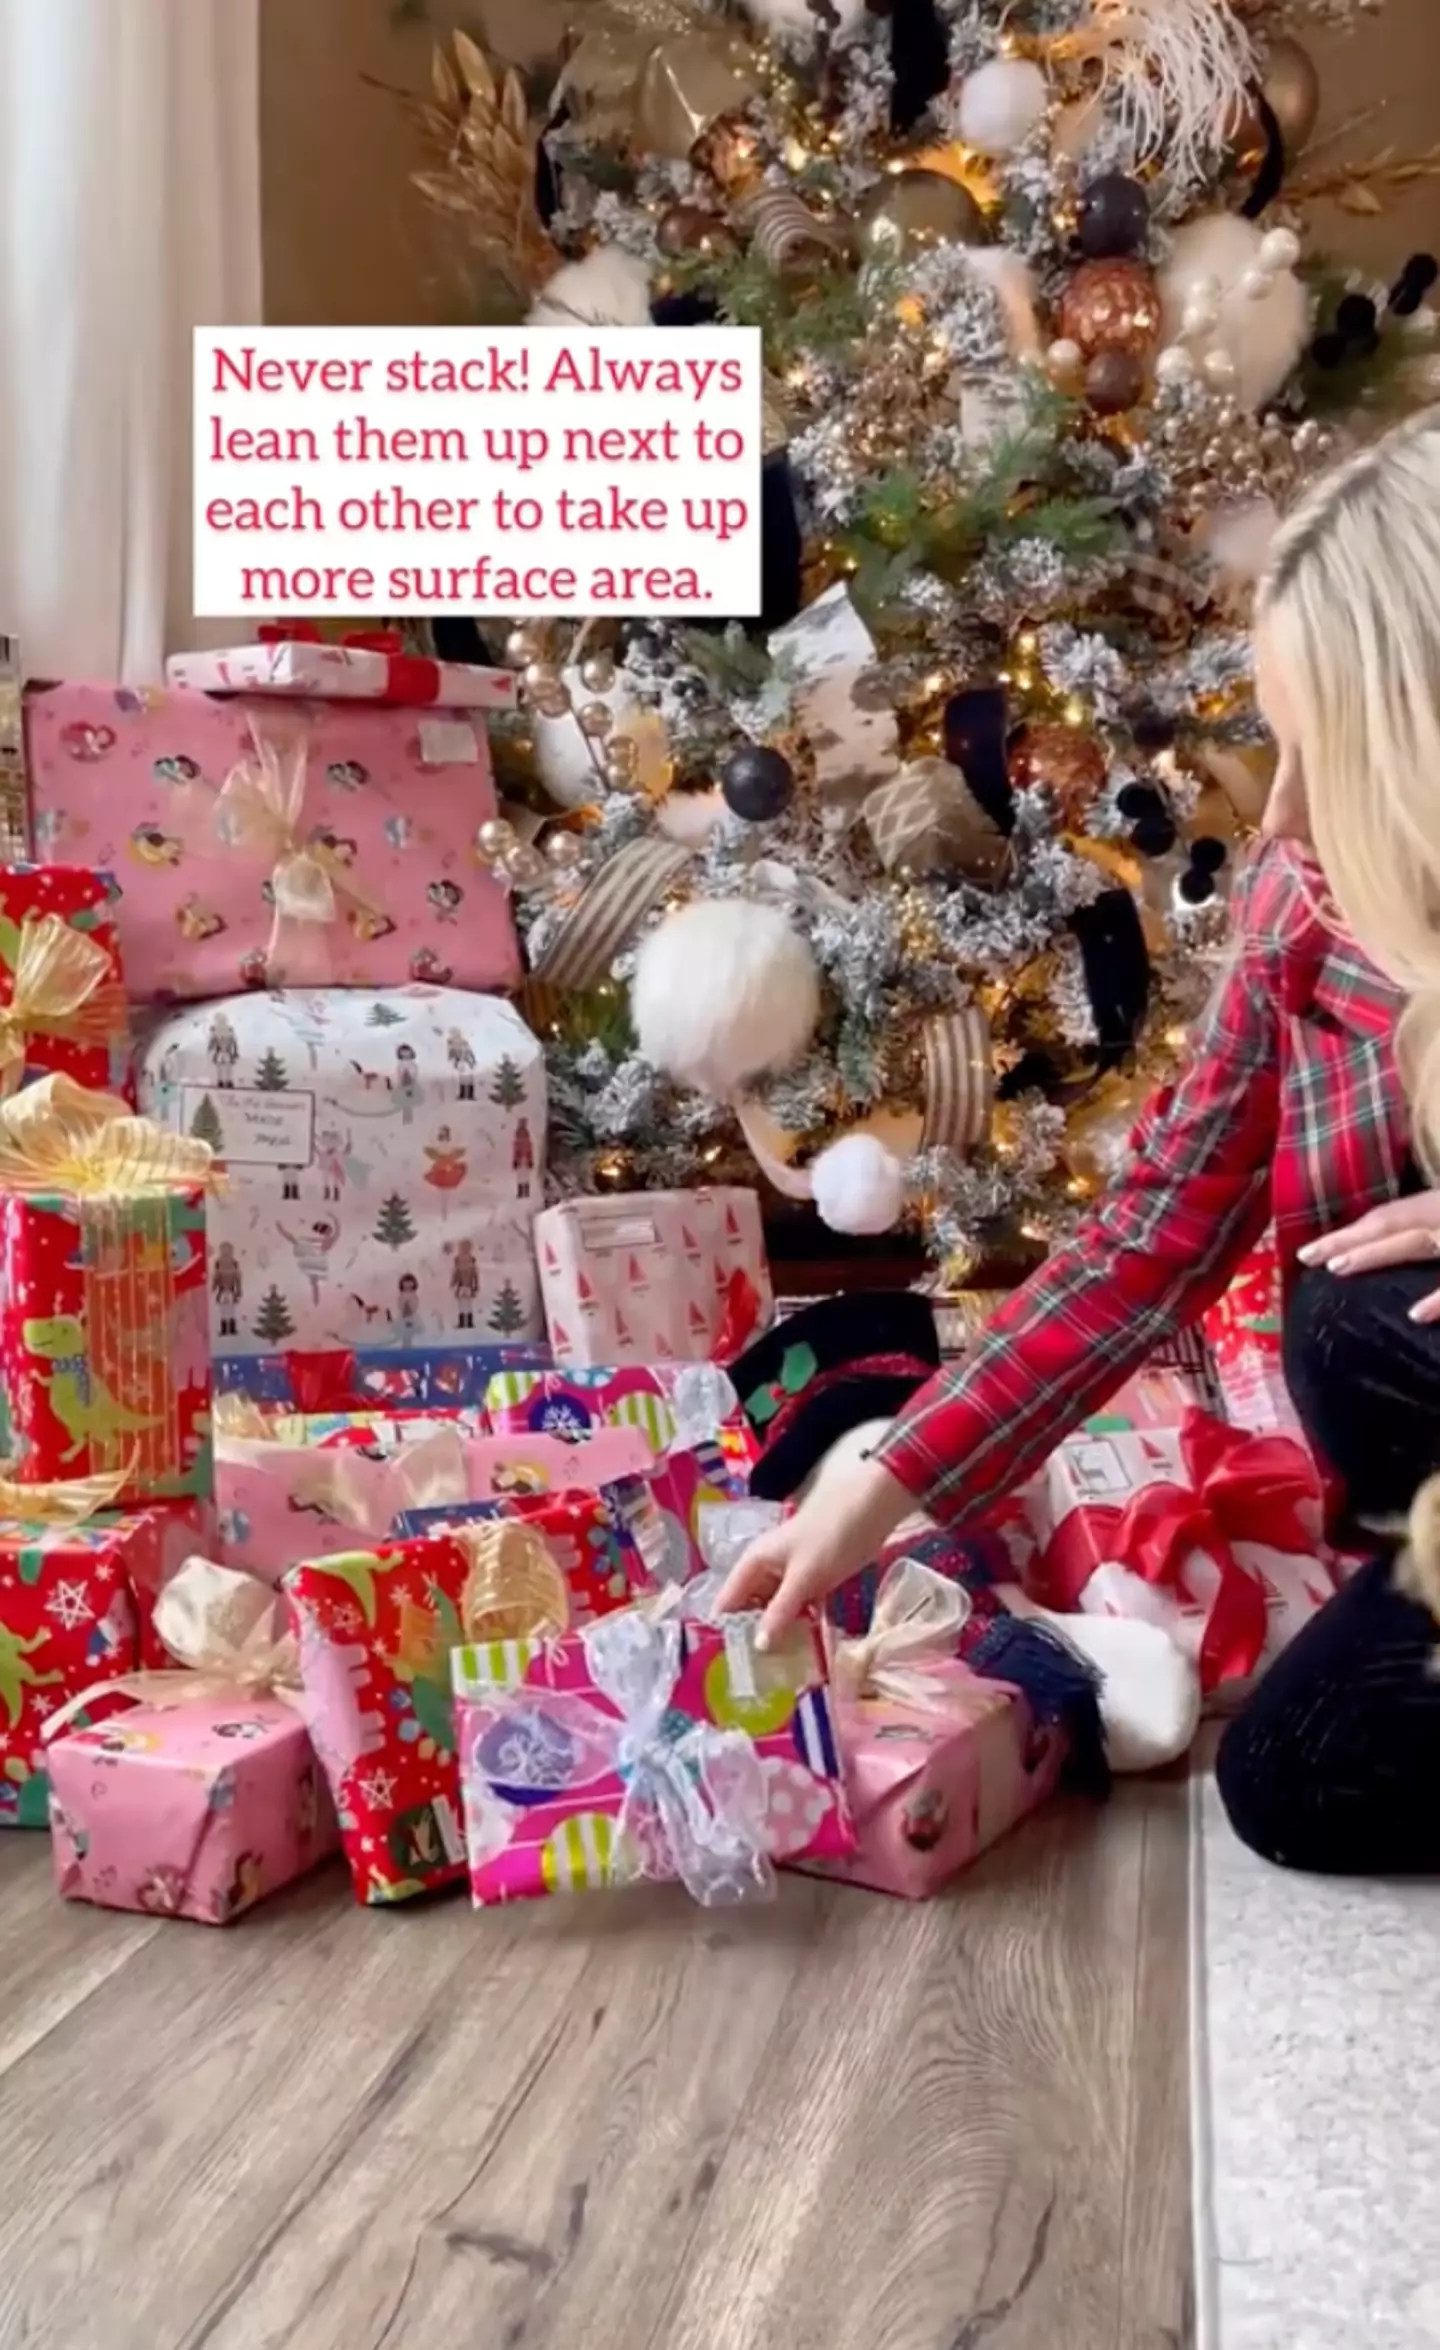 The social media star instructed her followers how to organise the gifts.